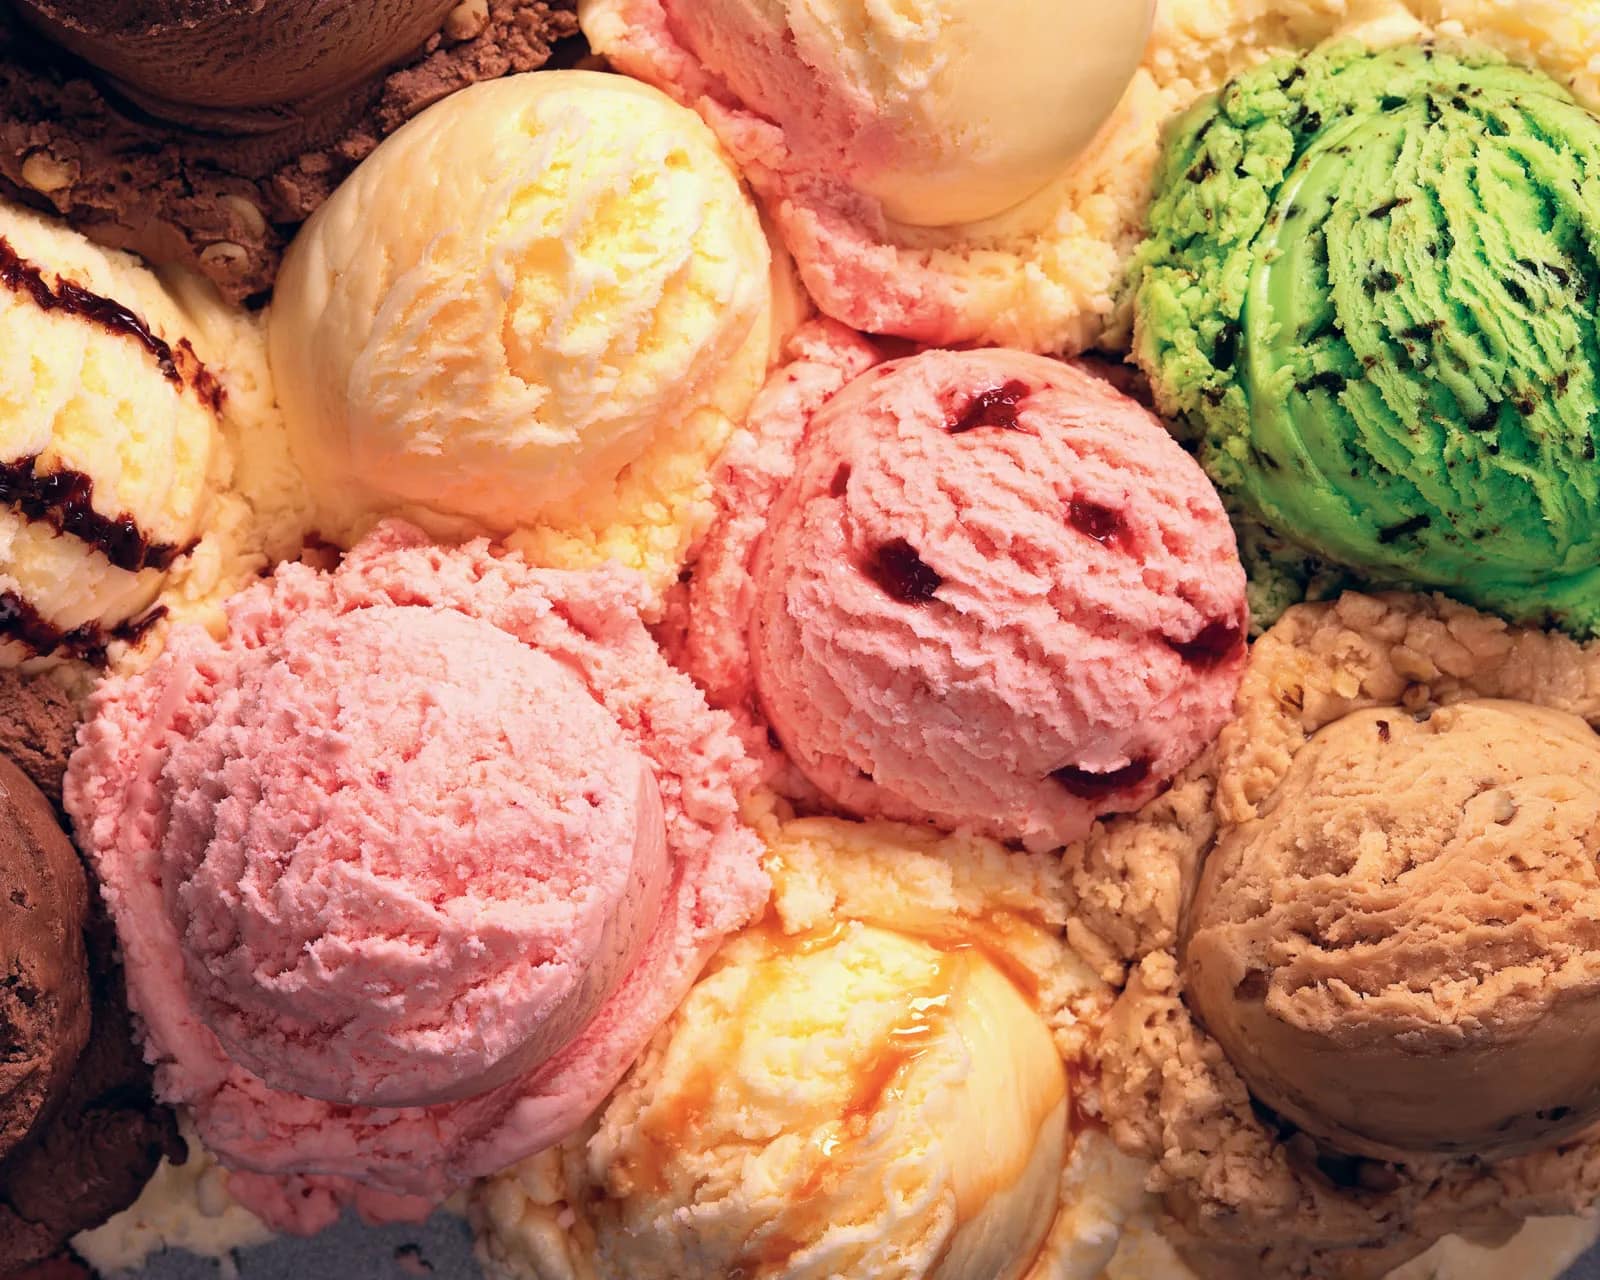 The Scoops of Summer: Visit the Best Ice Cream Shops in Crawford County